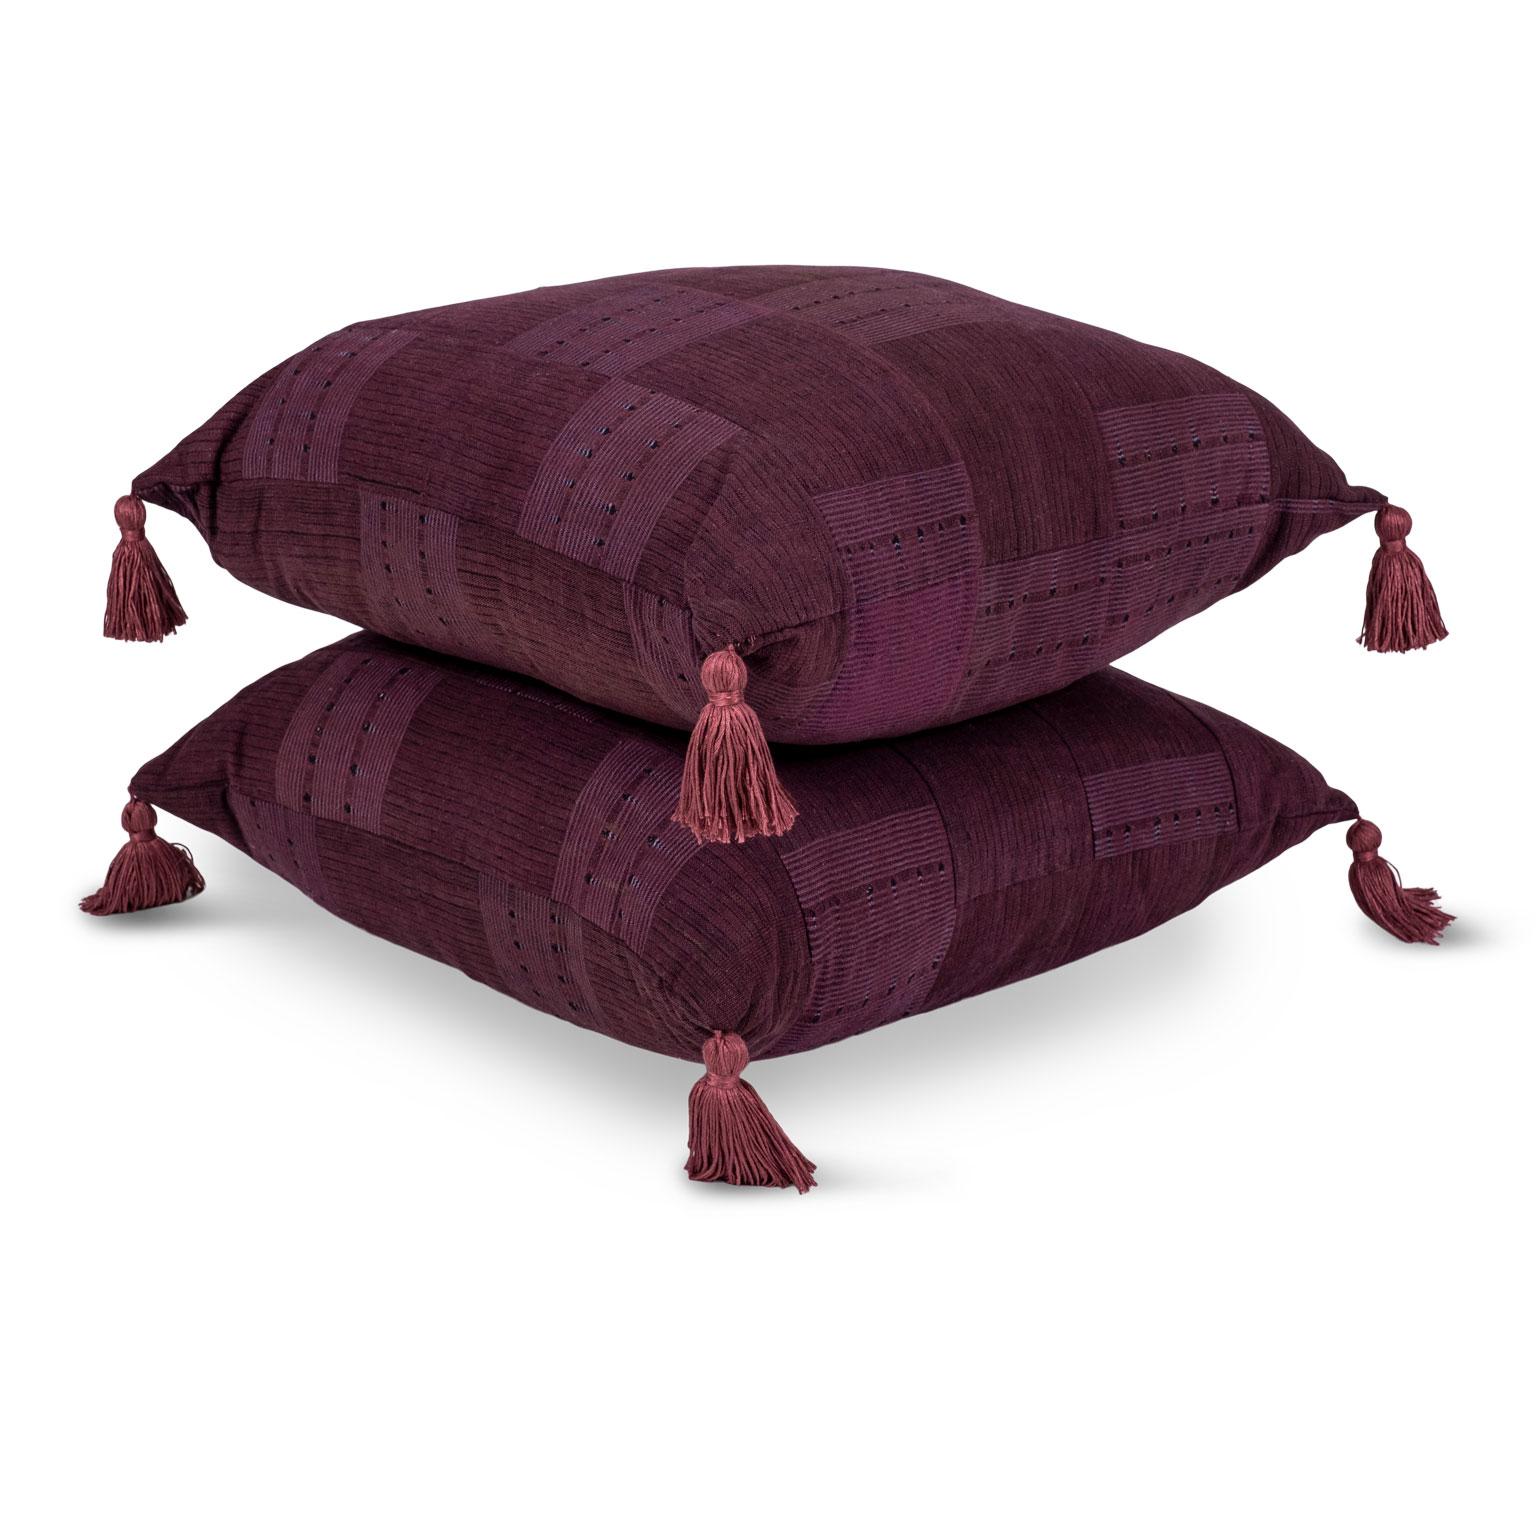 Tribal Plum Color Cushions with Tassels